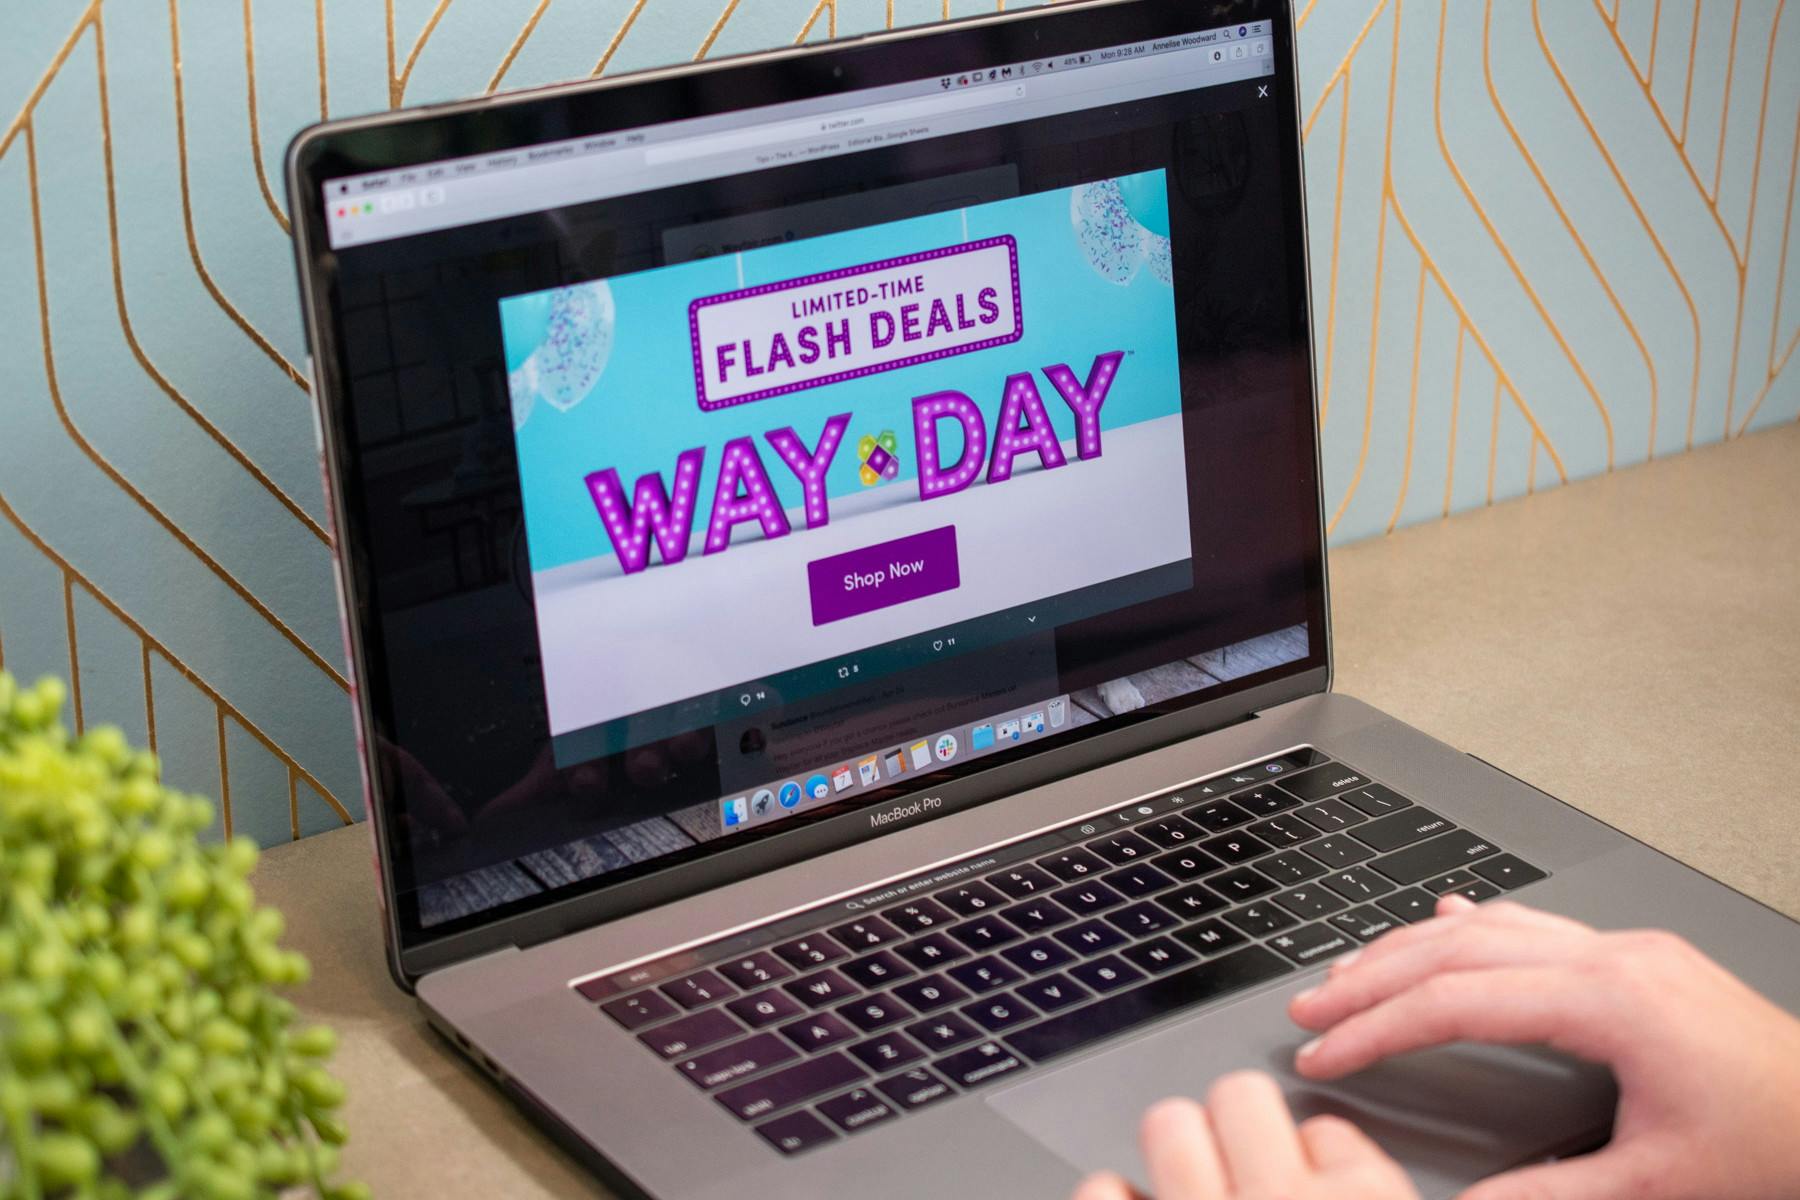 How To Save with Wayfair Deals and Coupons - The Krazy Coupon Lady